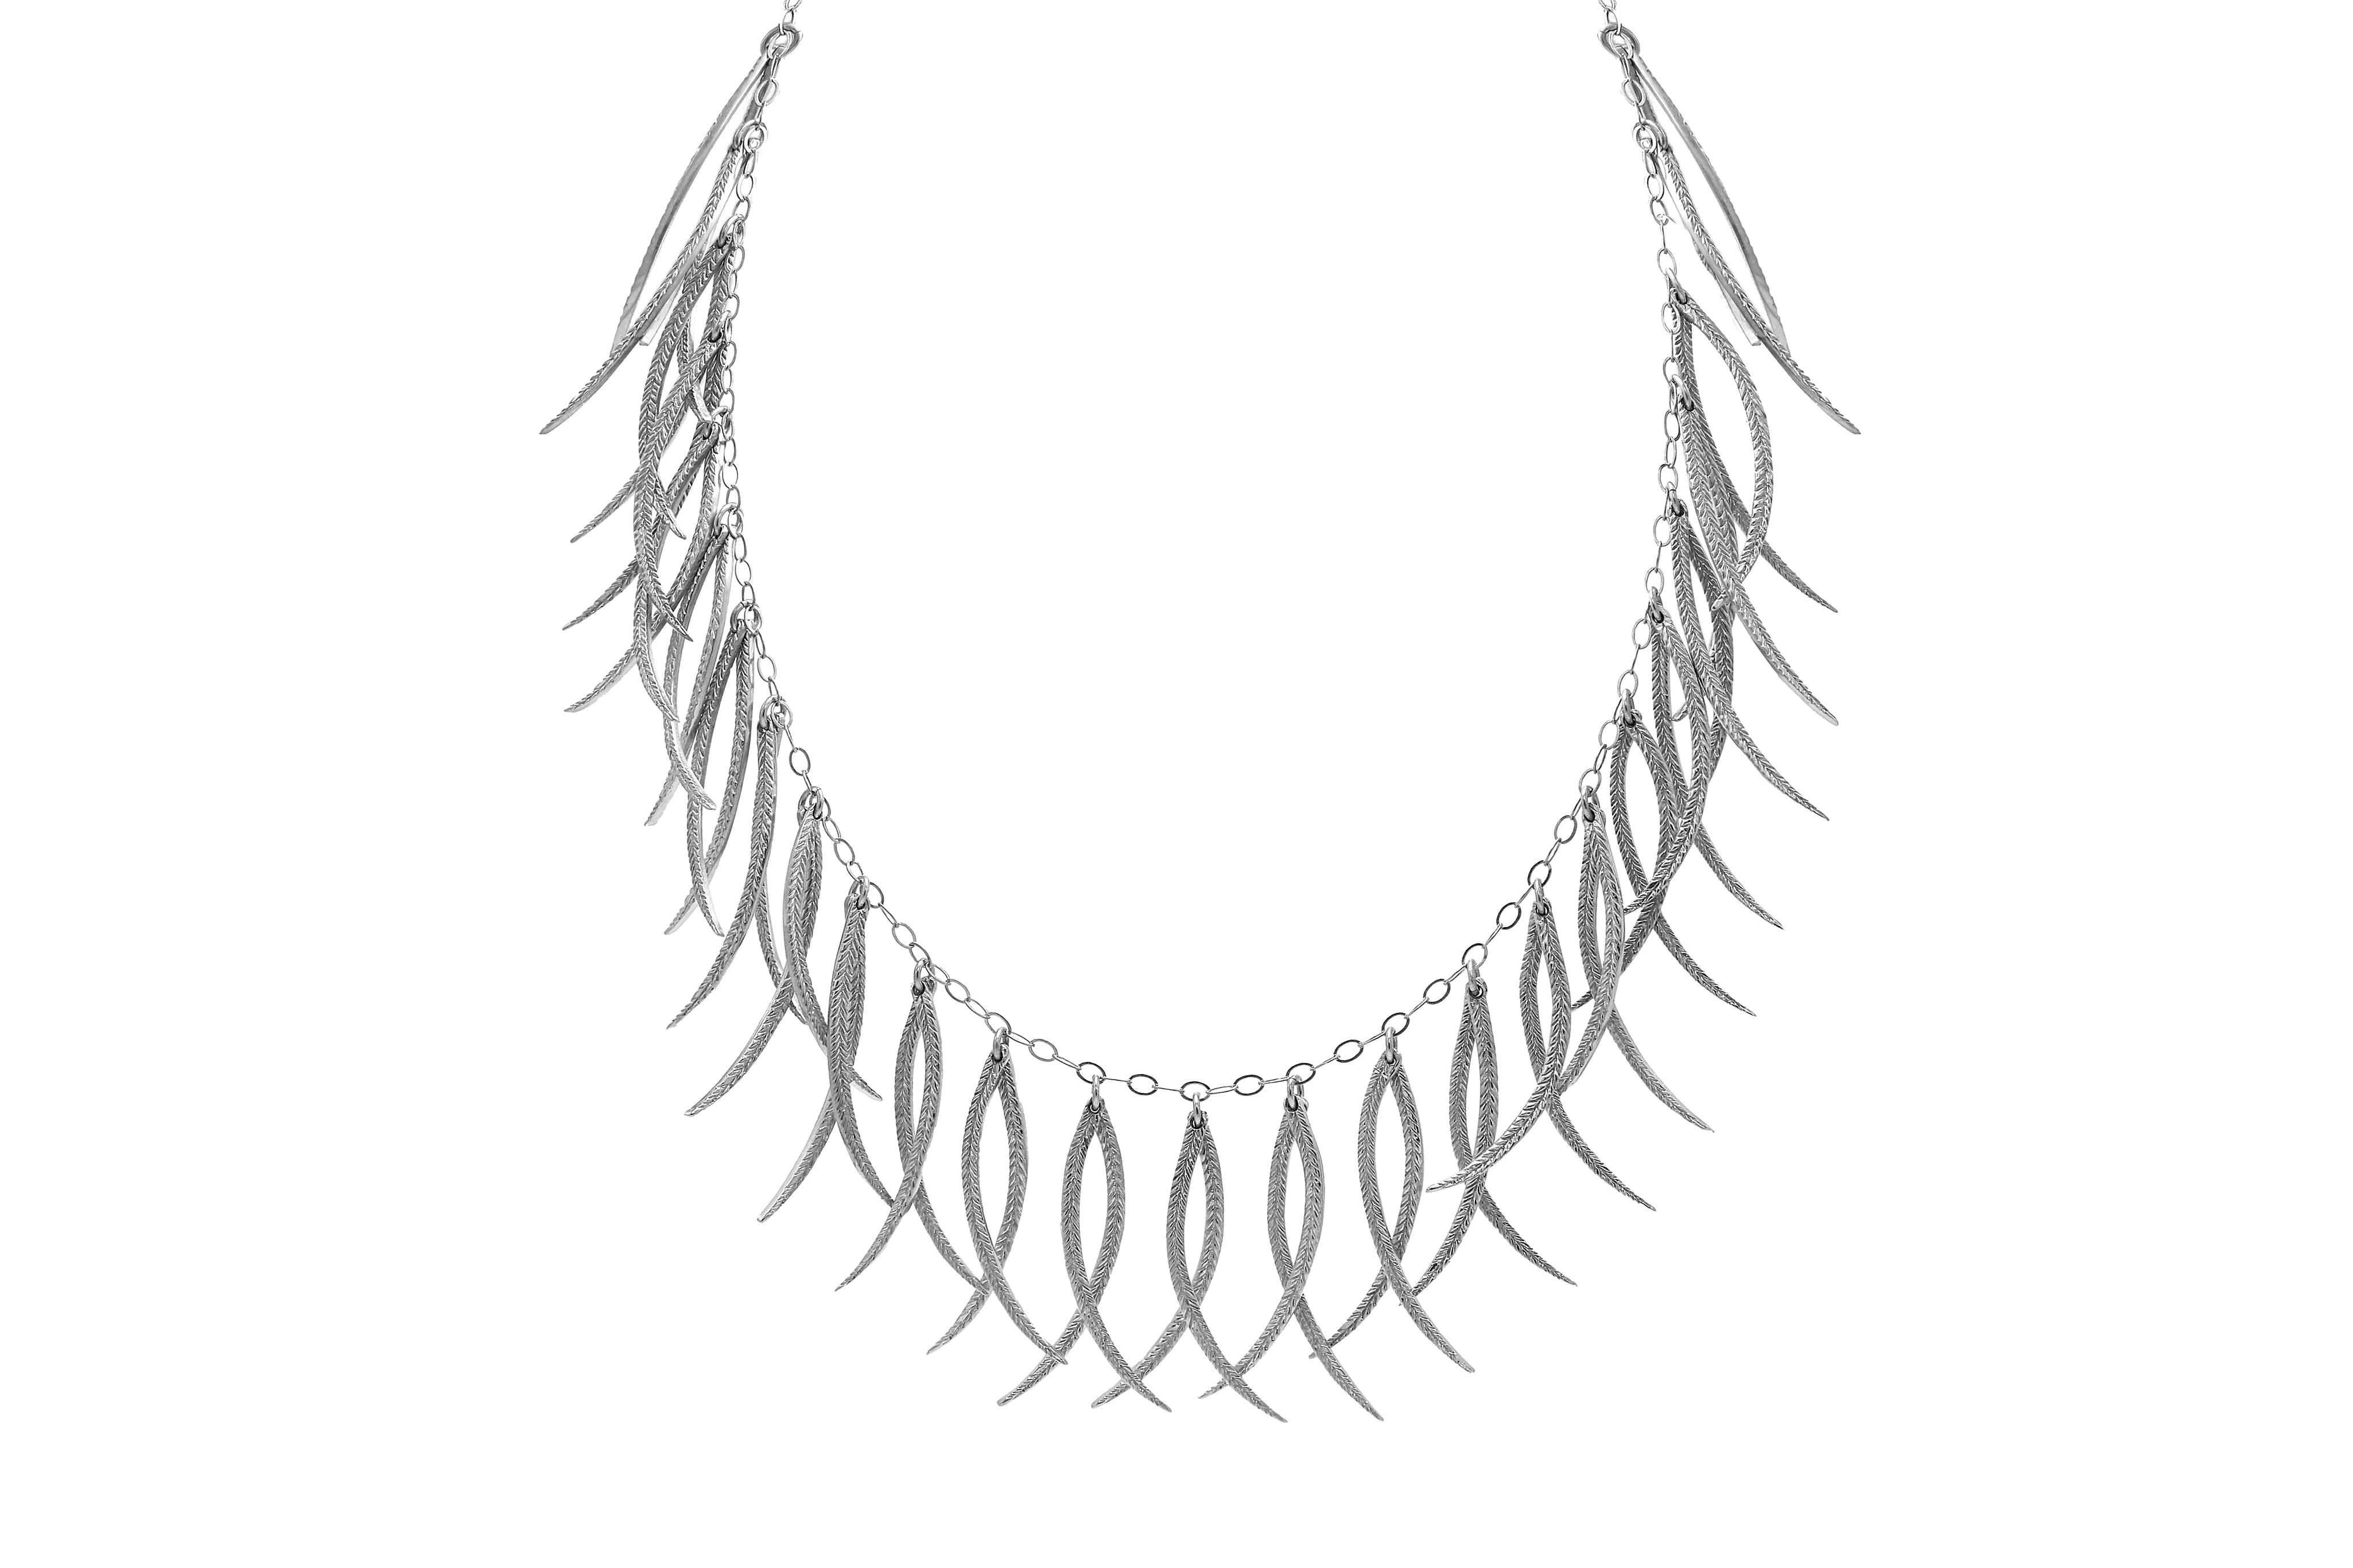 Necklace Quetzal tail